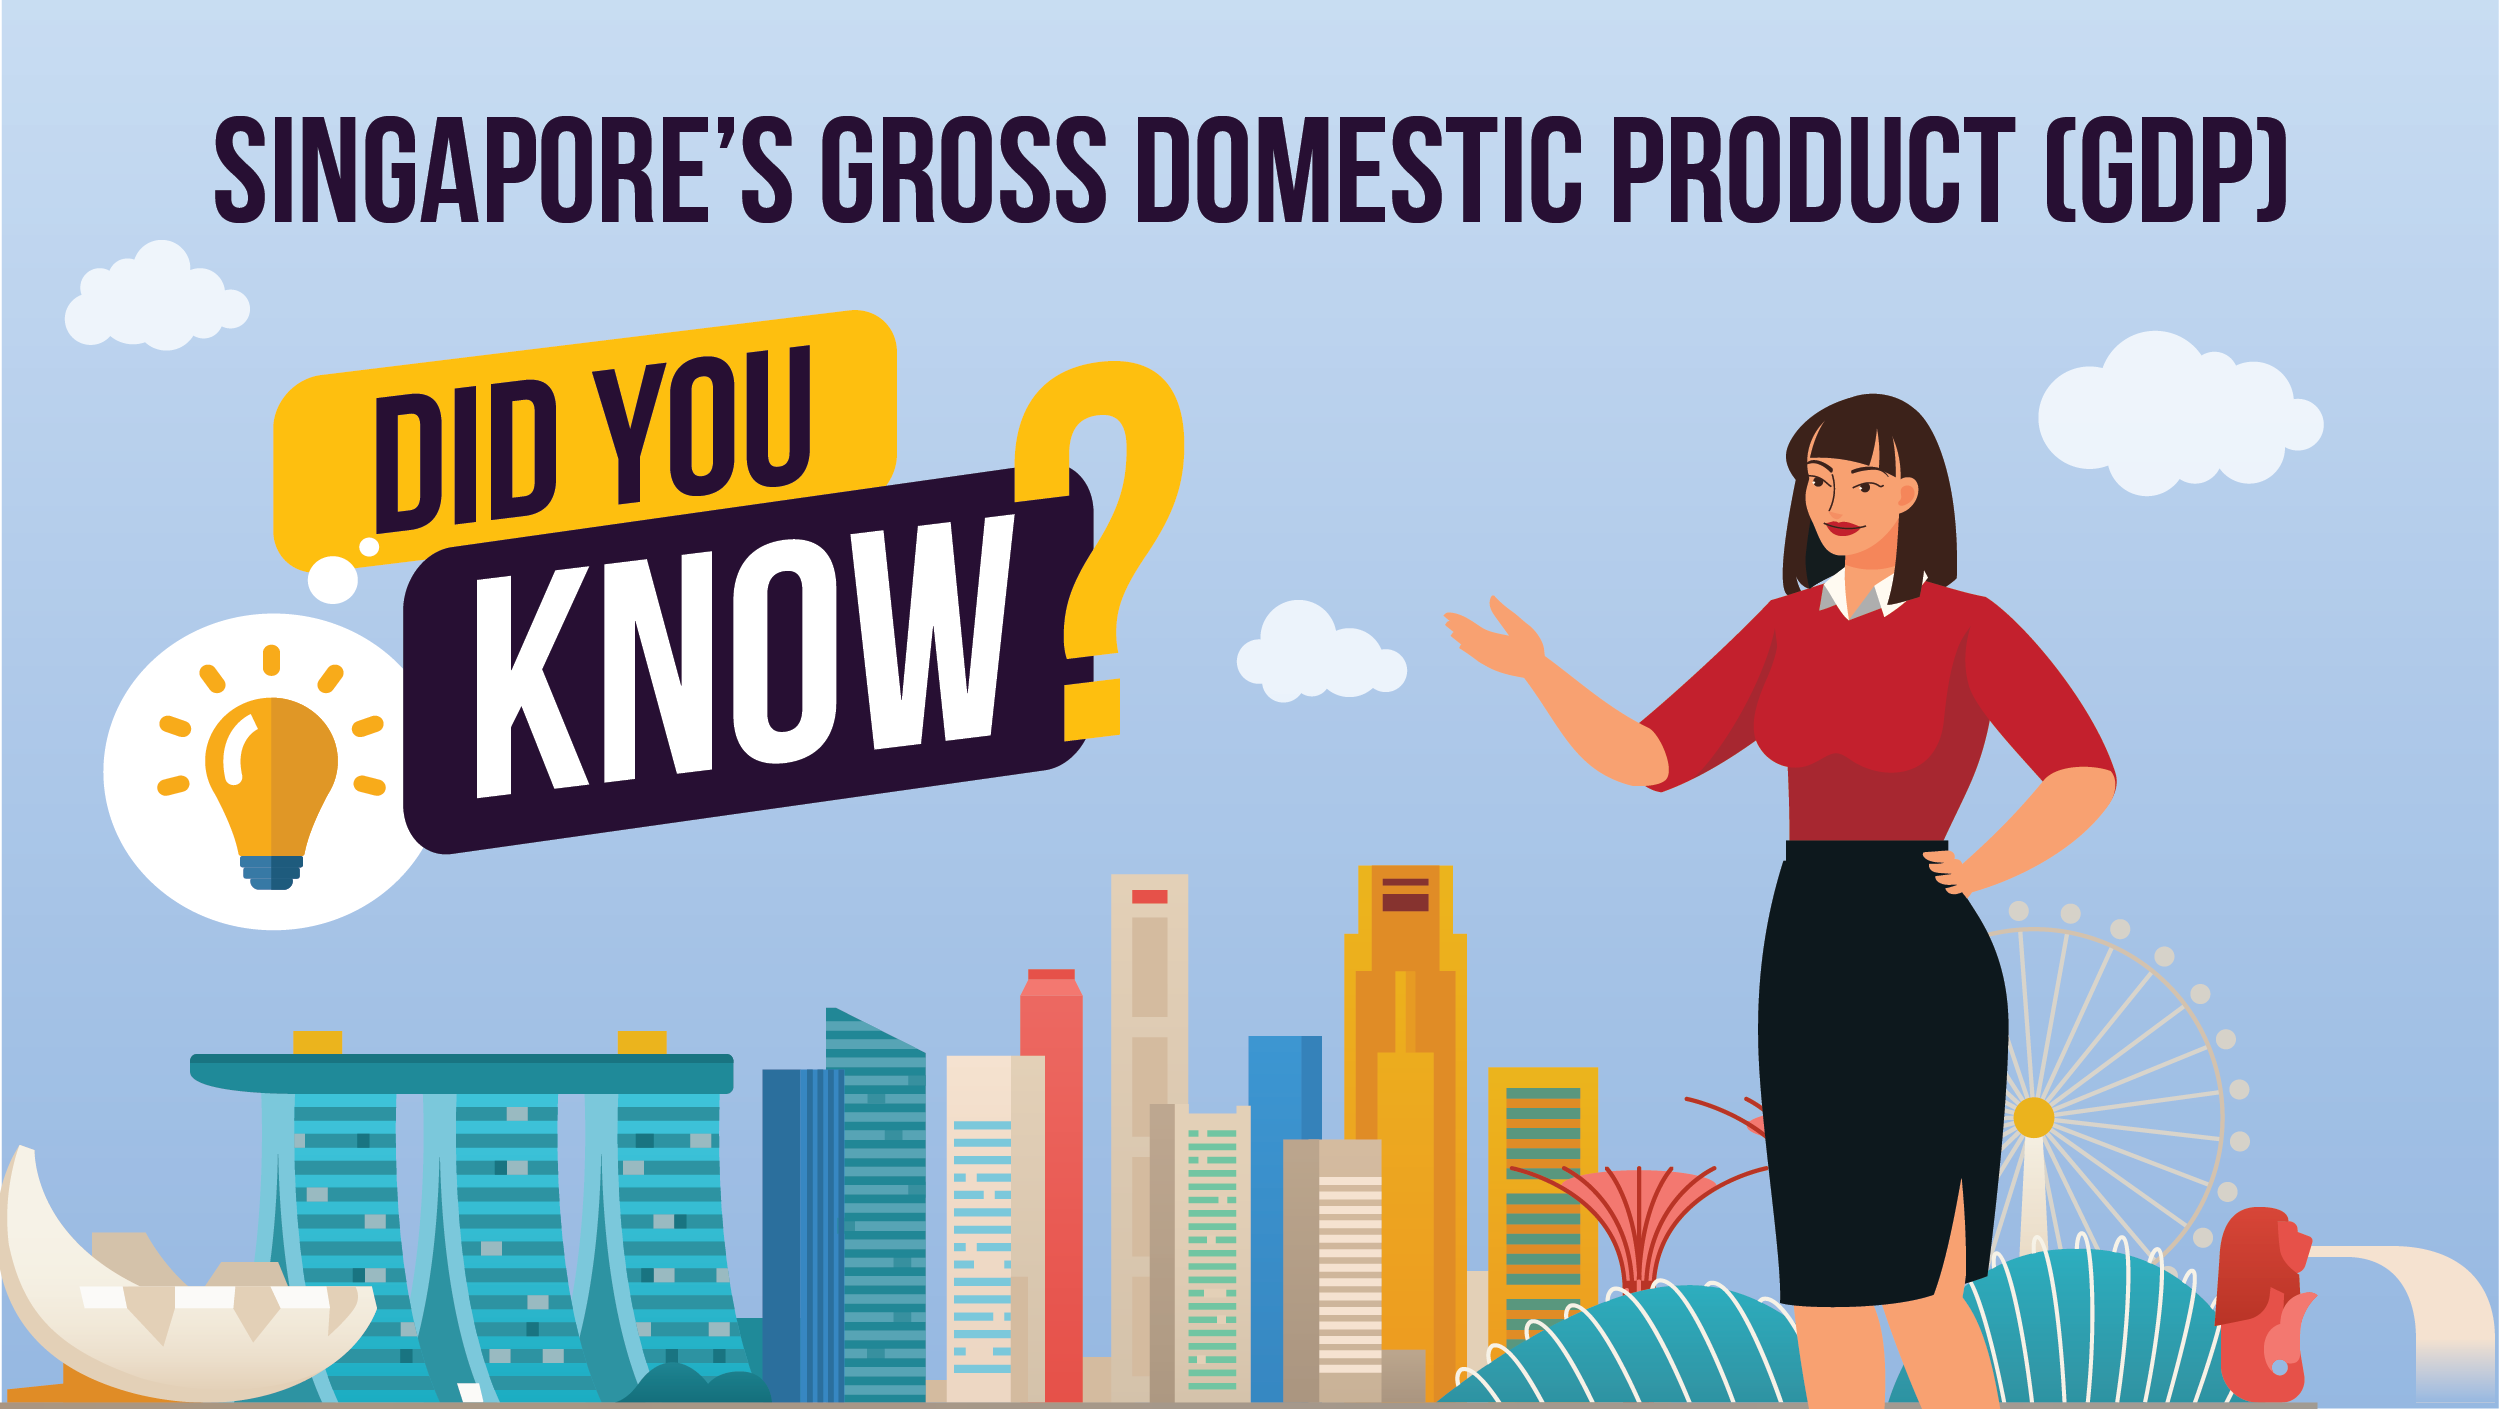 Singapore's GDP - Did You Know?